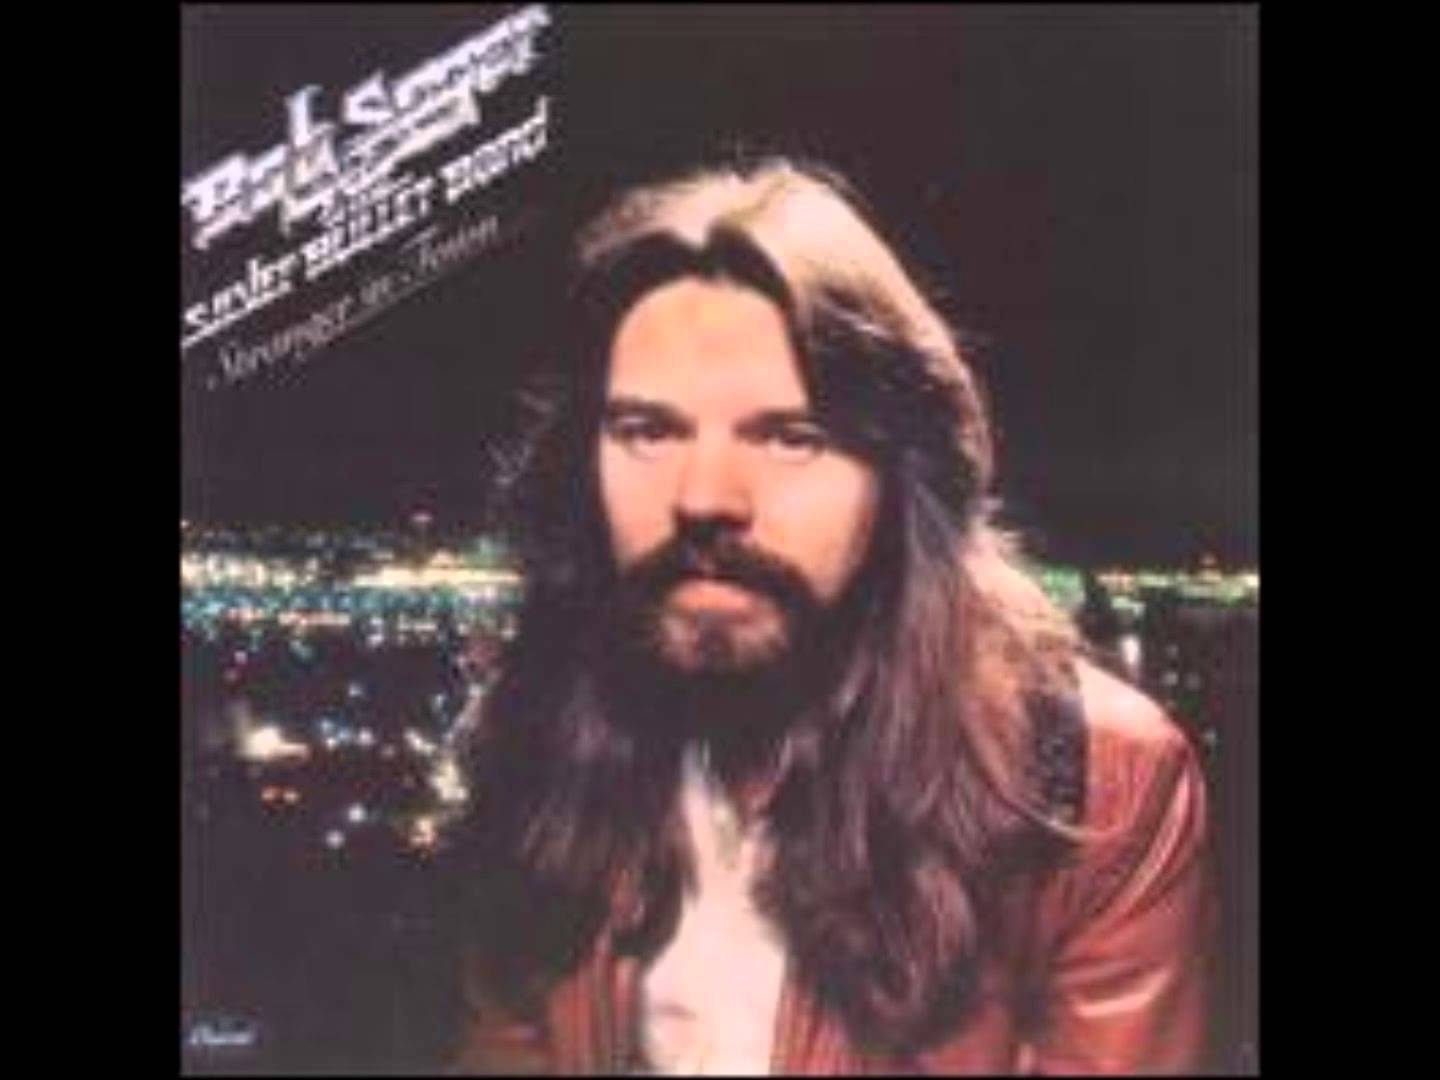 Bob Seger – Old Time Rock And Roll